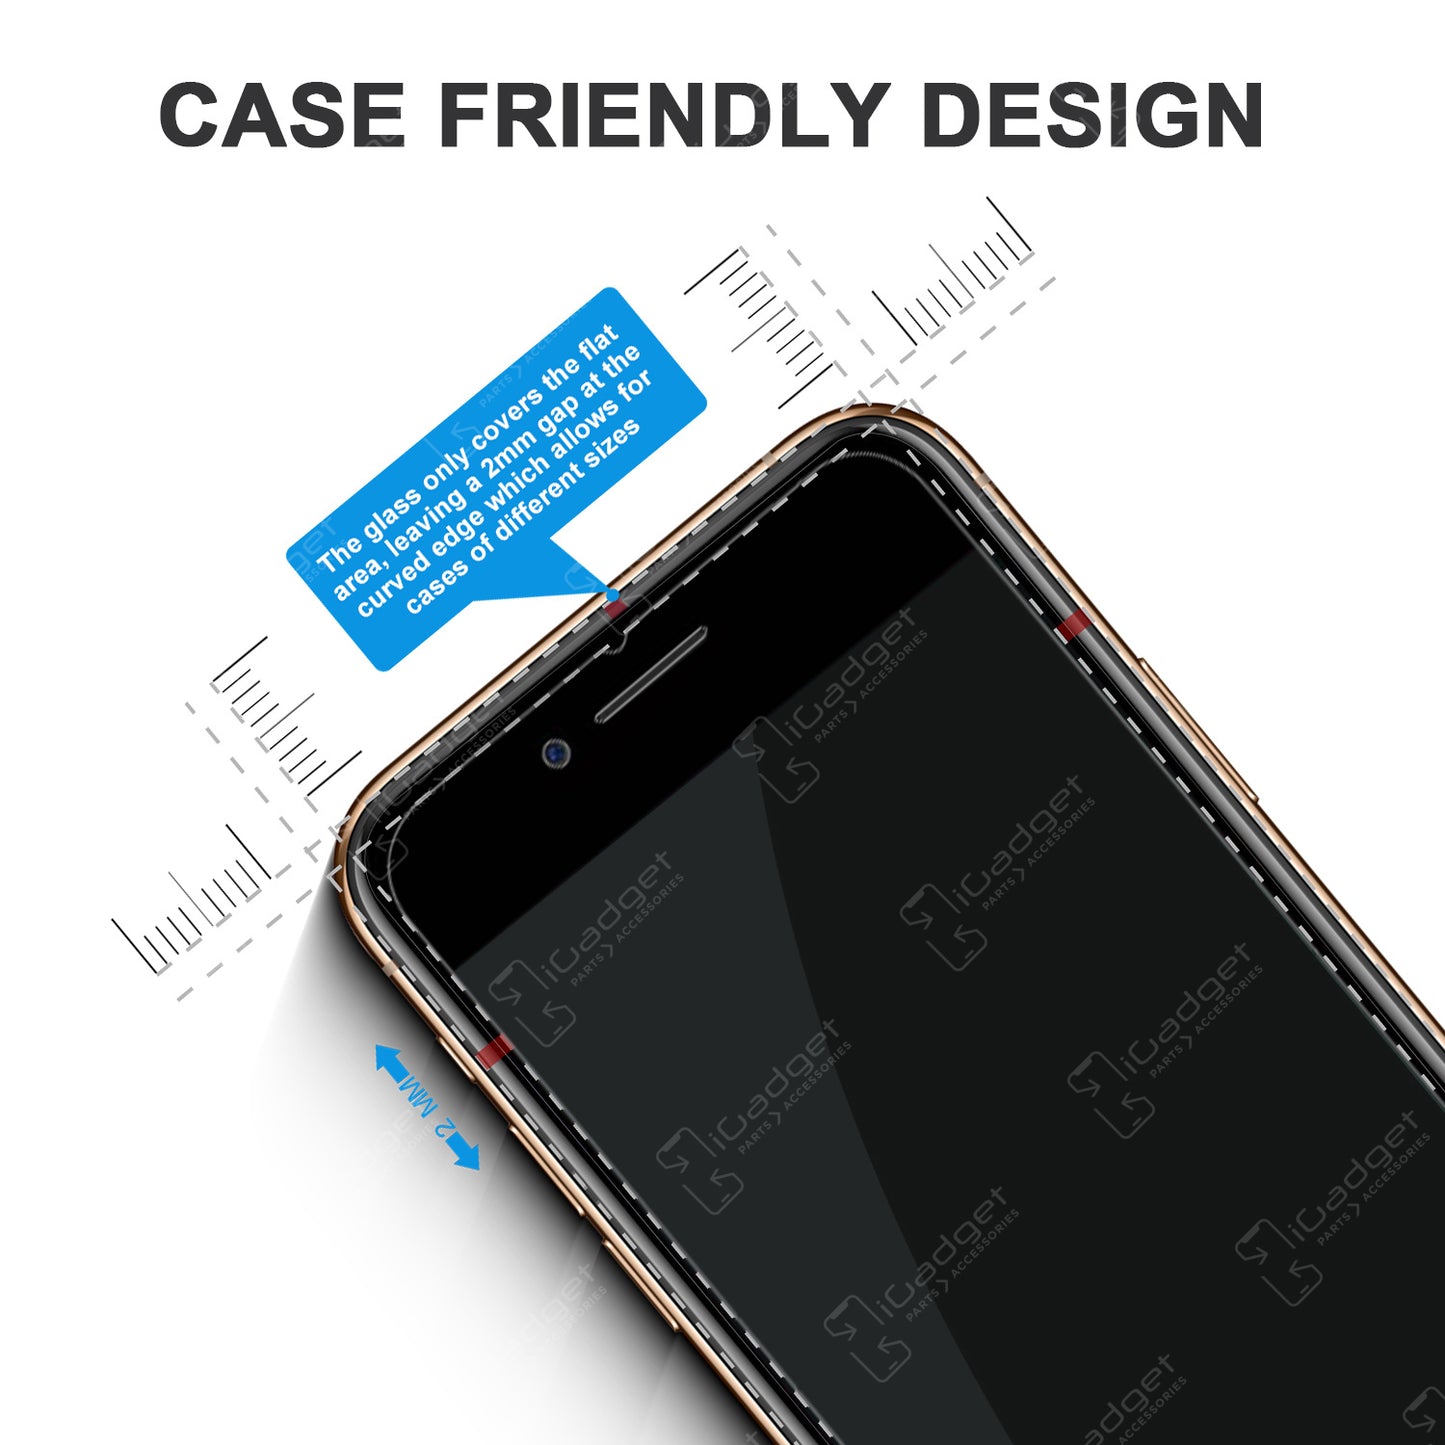 iPhone 6/6s Case Friendly Ultra Clear Glass Screen Protector